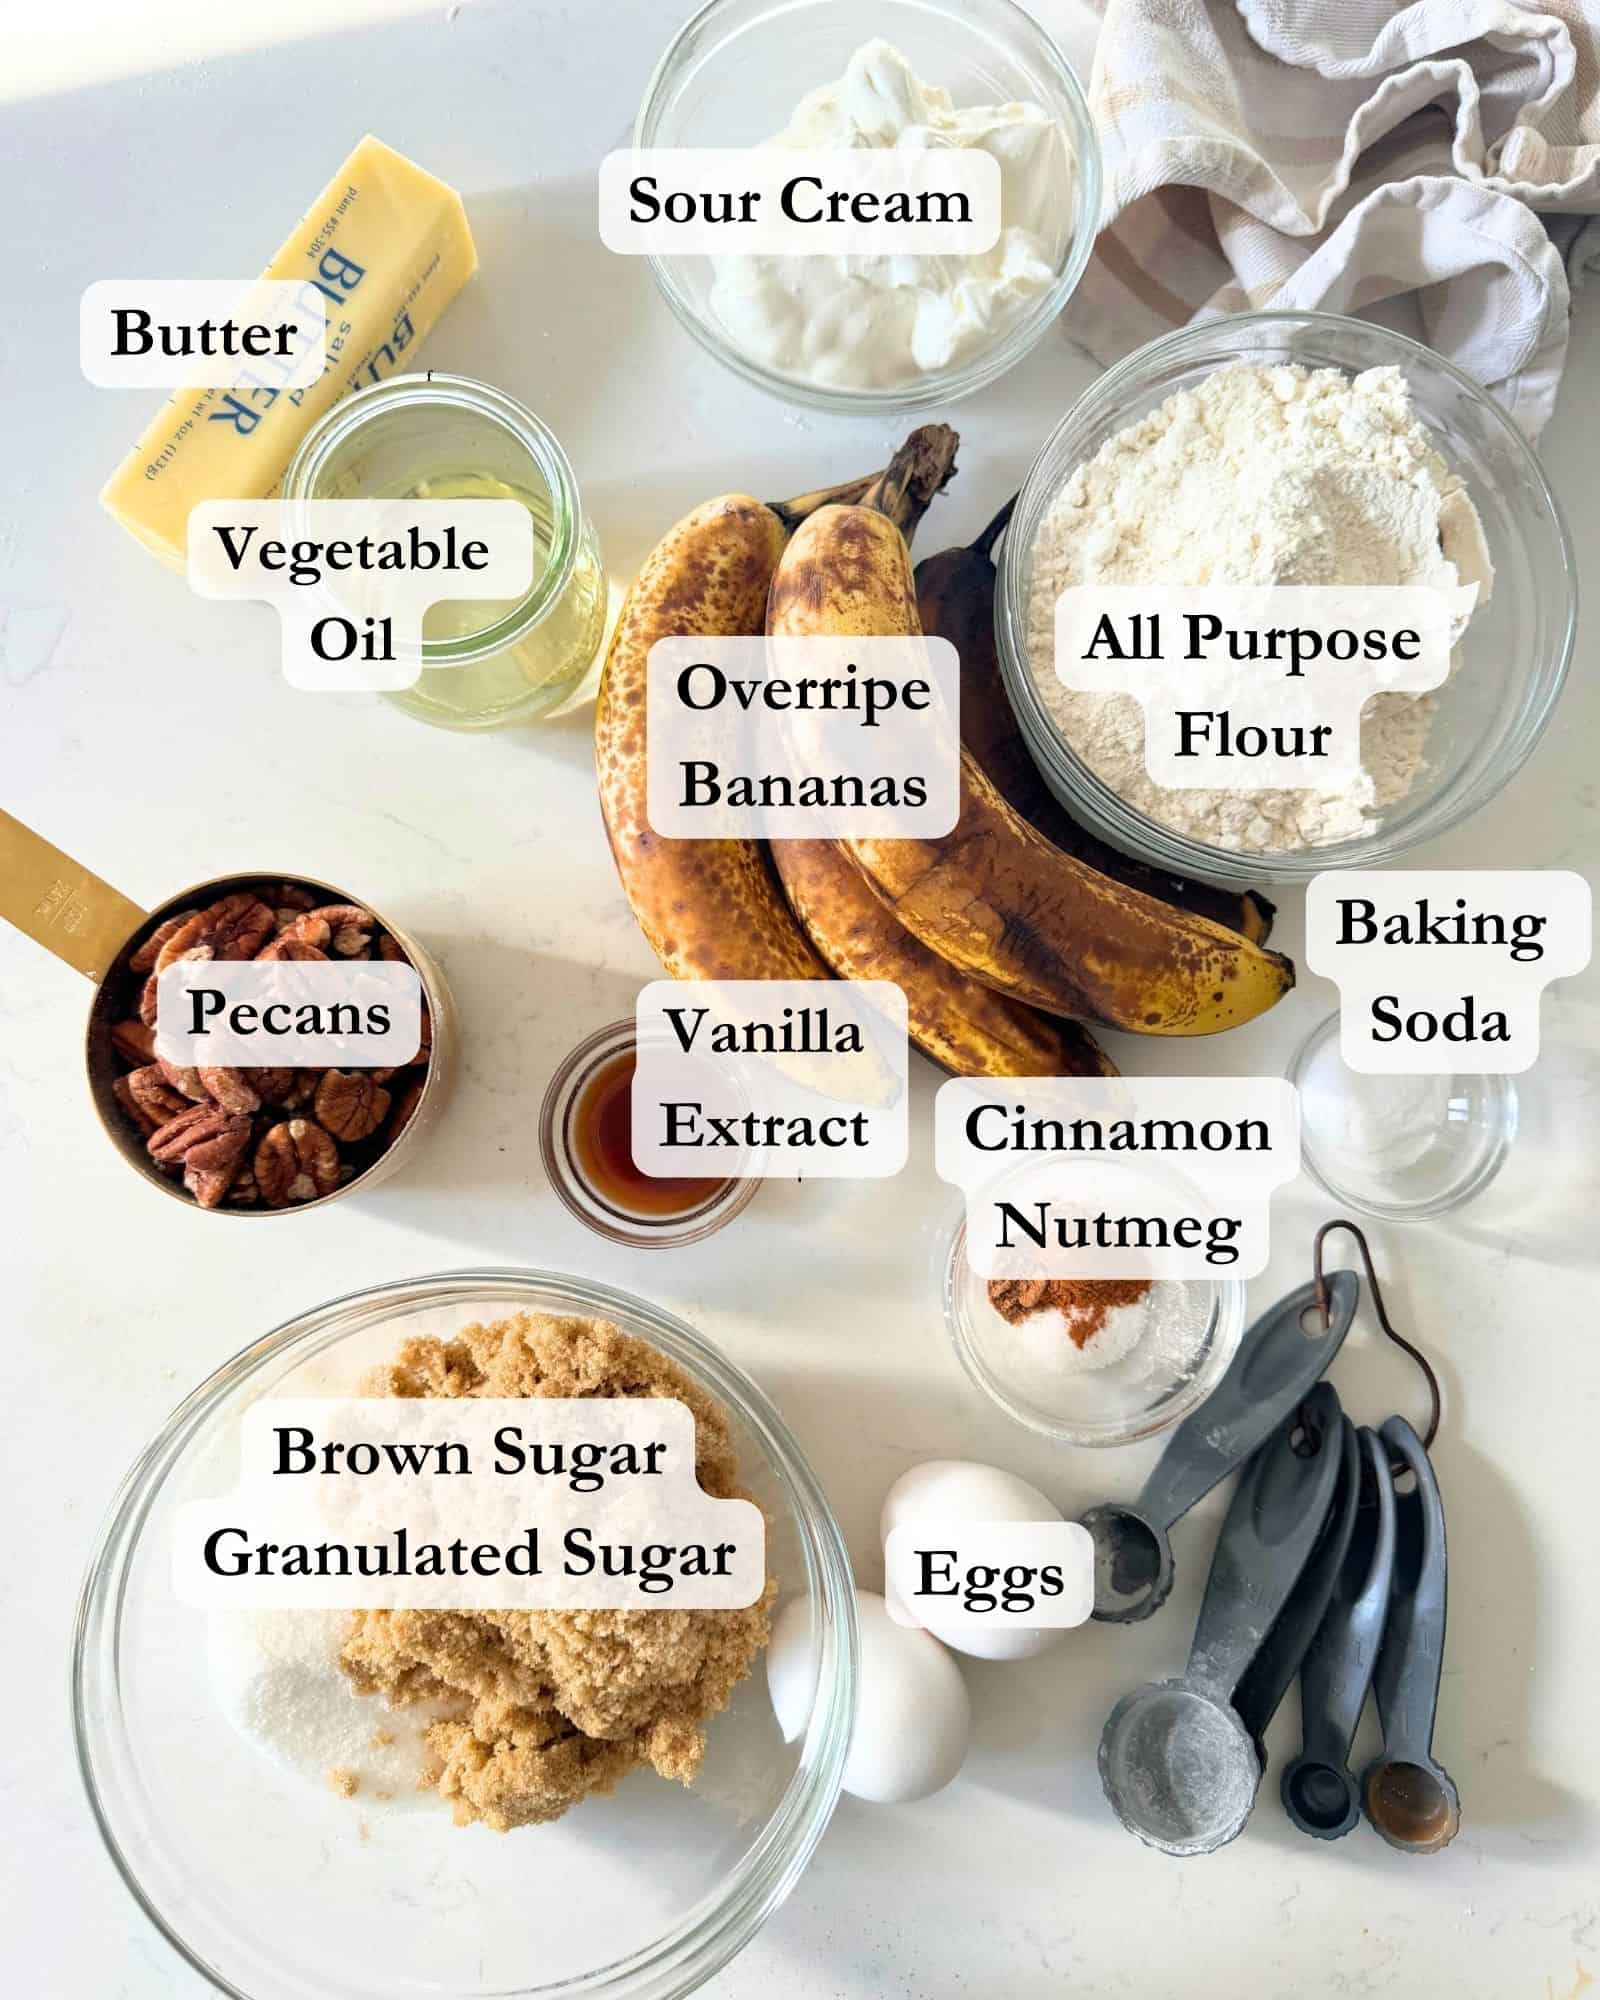 ingredients to make banana bread on a white surface - overripe bananas, sugar, brown sugar, eggs, flour, cinnamon, nutmeg, sour cream, vanilla extract, pecans, butter, vegetable oil, and baking soda